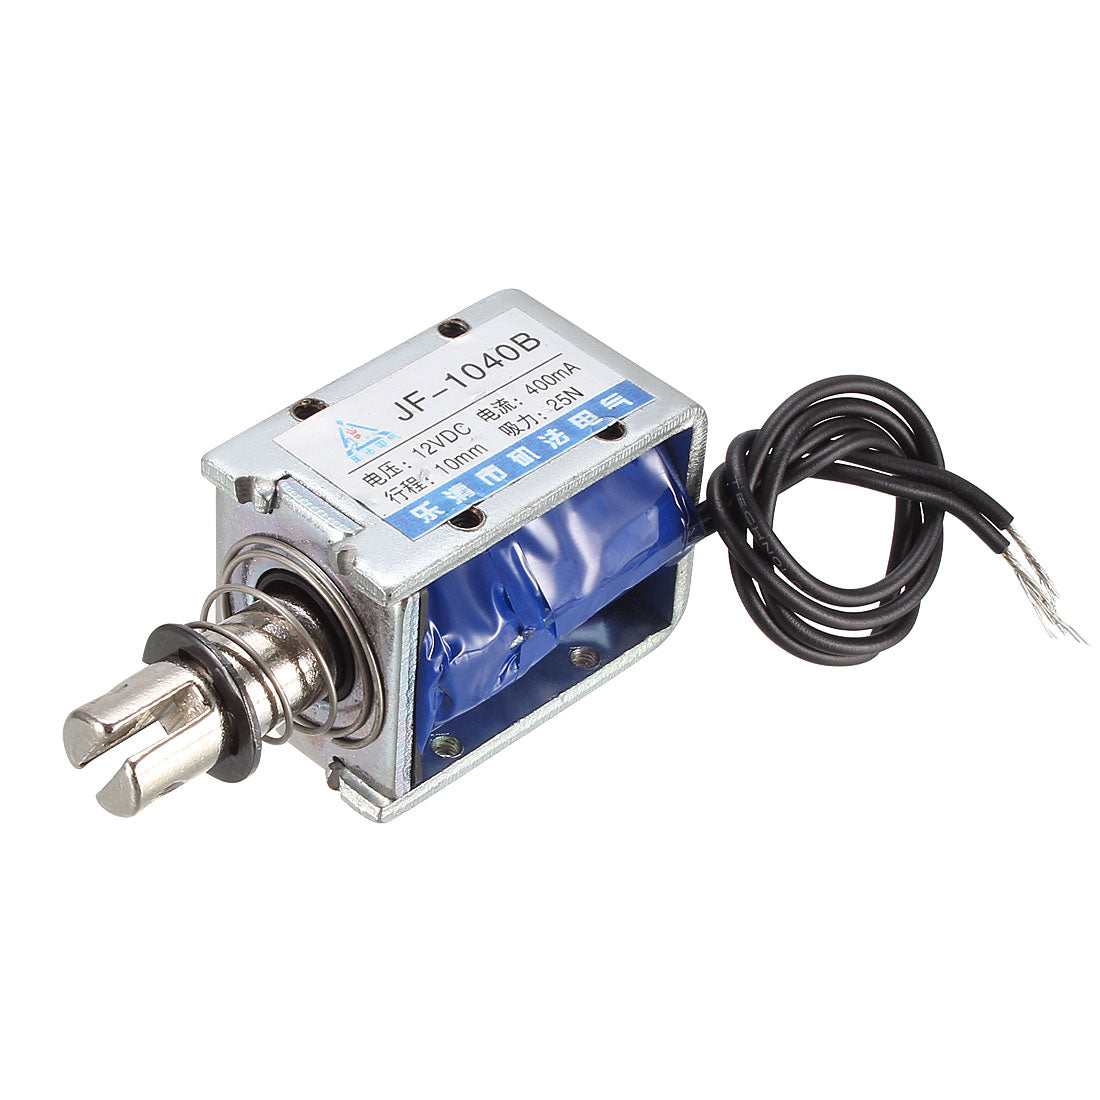 uxcell Uxcell JF-1040B DC12V 400mA 10mm/25N Push Pull Type Electromagnet Solenoid Open-frame